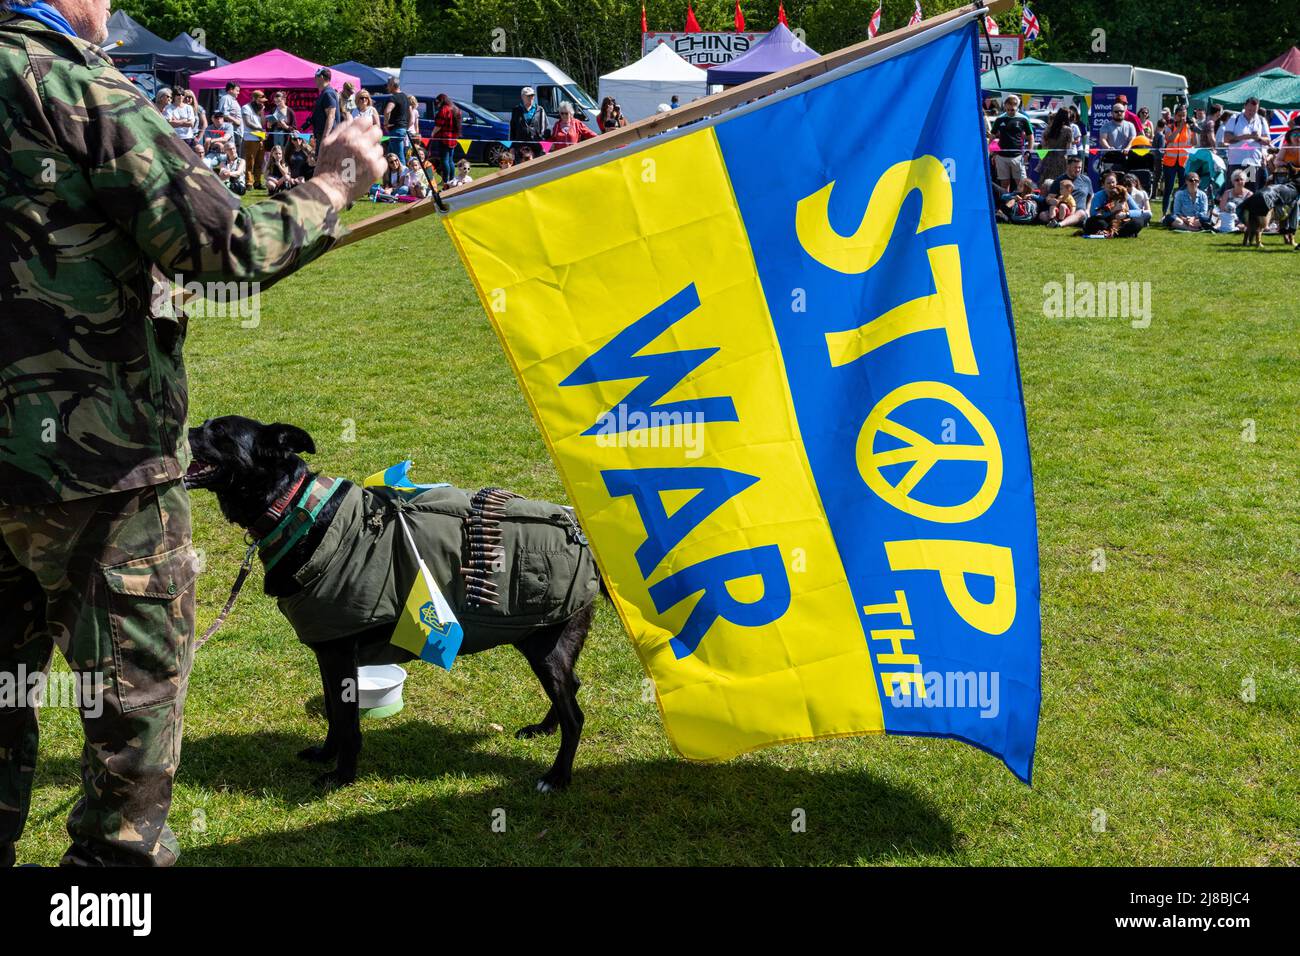 Stop the War Ukraine Flag held by ex-serviceman with dog dressed in flak jacket with bullets, Fancy dress dog show, Frimley, Surrey, UK, May 2022 Stock Photo